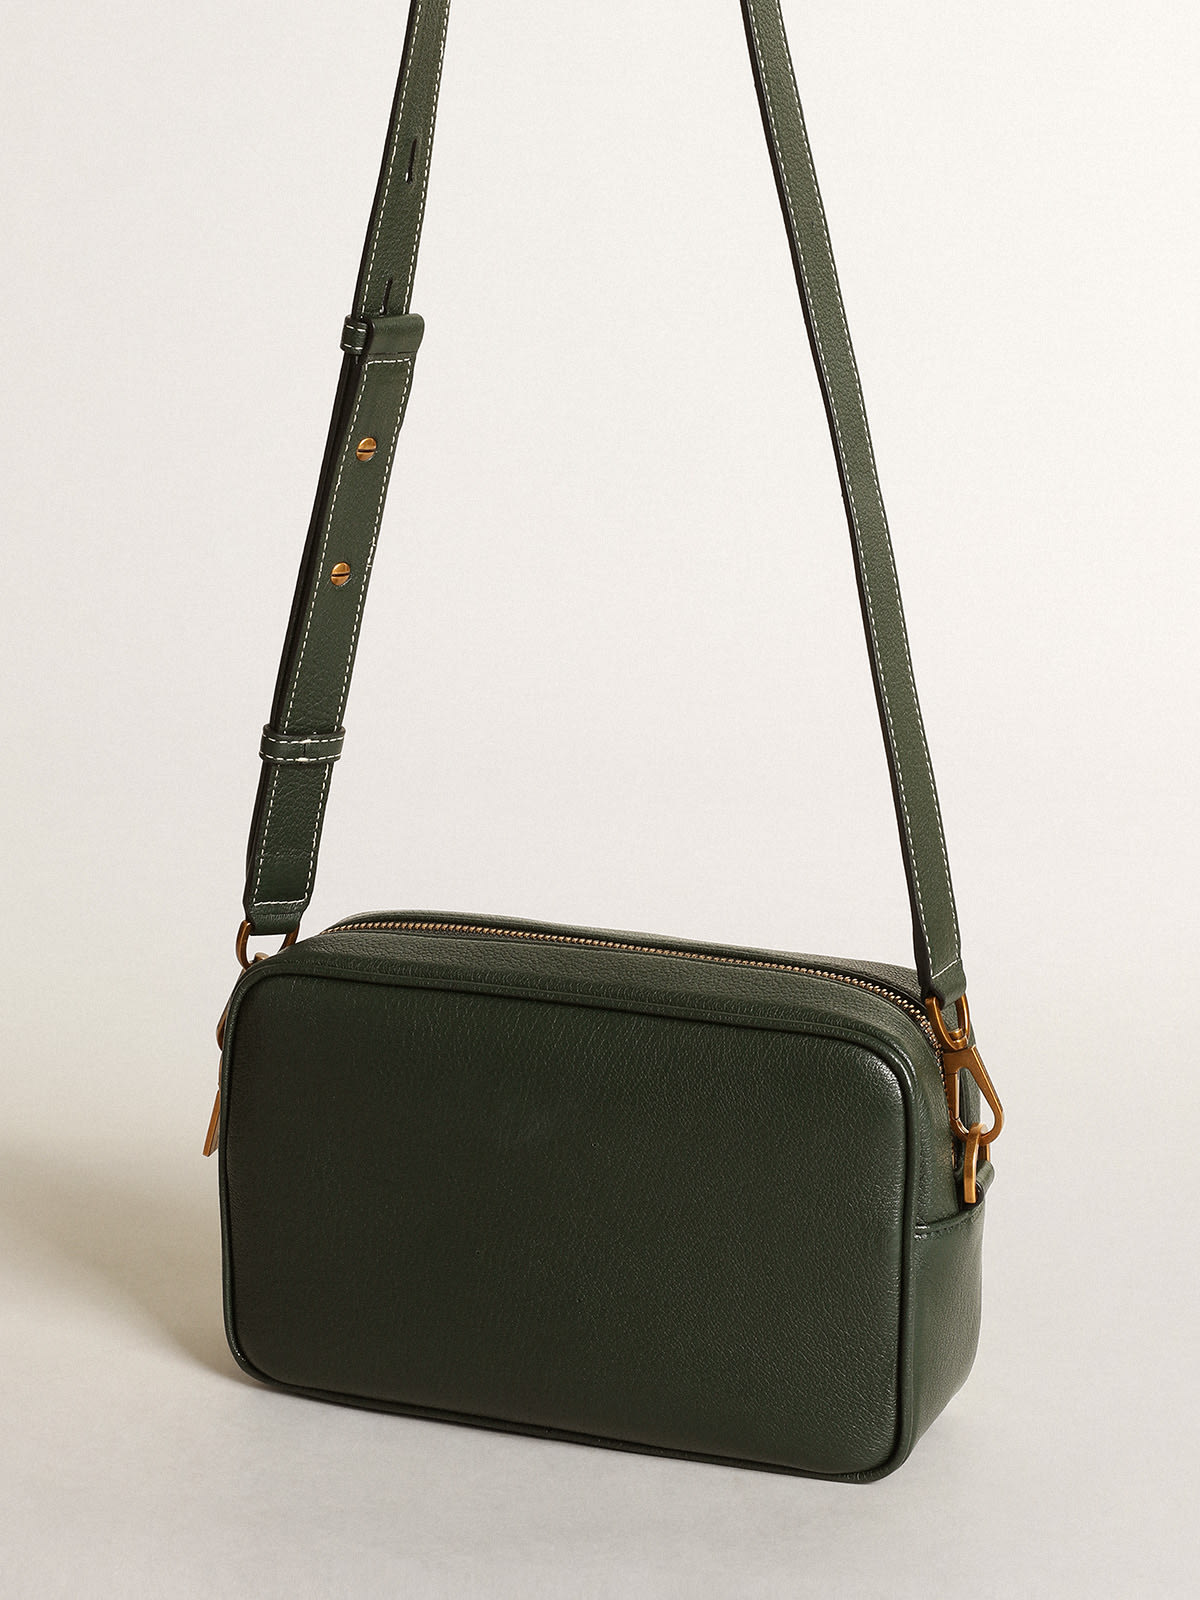 Golden Goose - Women's Star Bag in dark green leather with tone-on-tone star in 